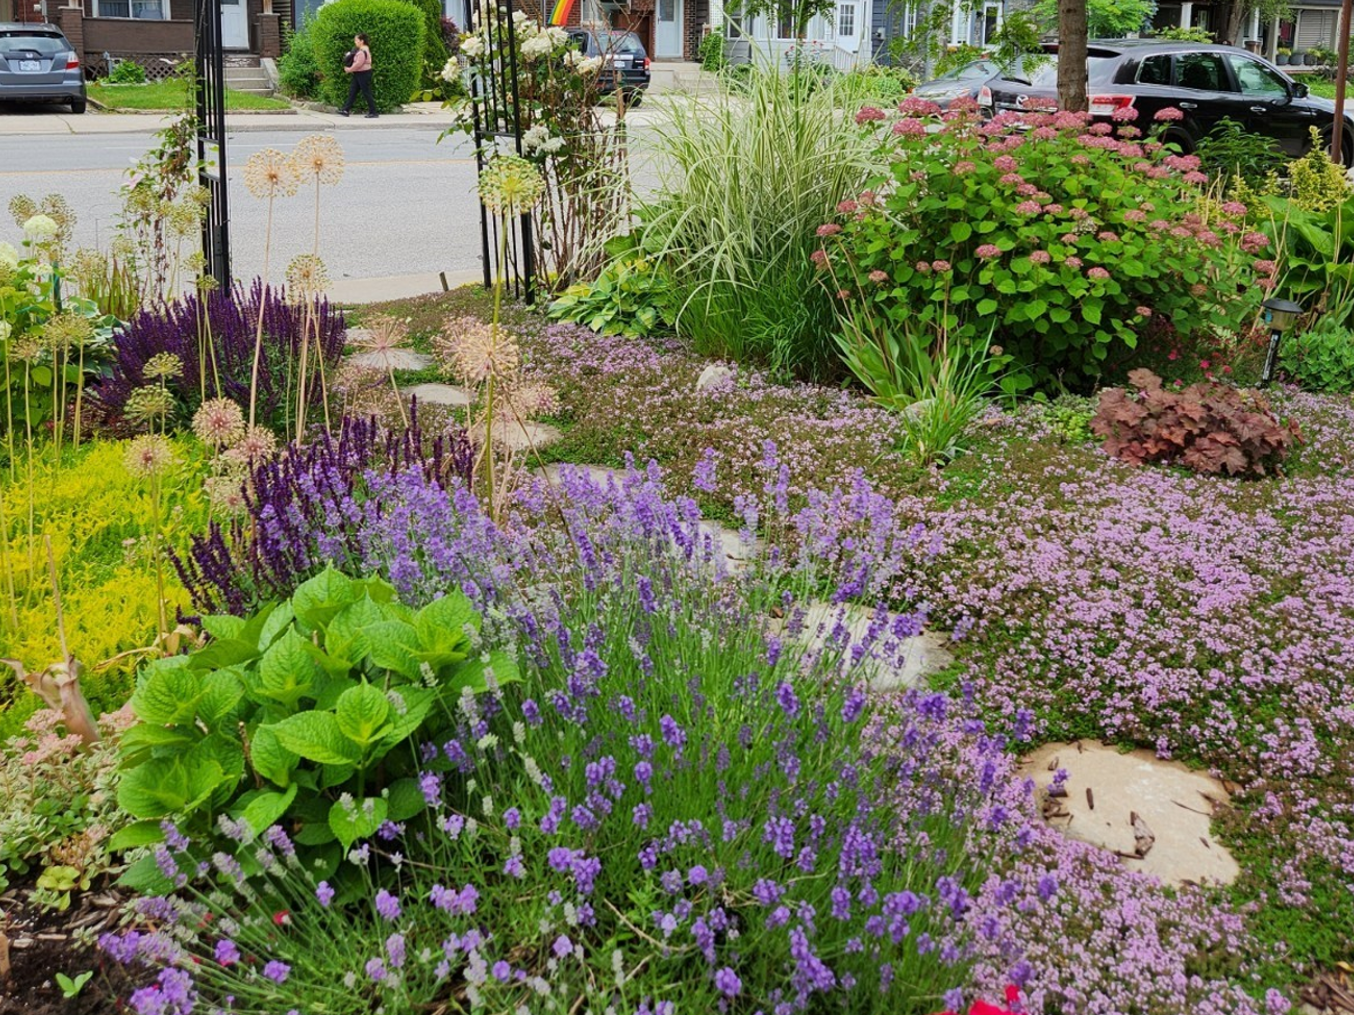 A photo of 2023’s pollinator garden contest winner. The garden has a steeping stone path running through it. The garden itself has mostly purple flowers among greenery.